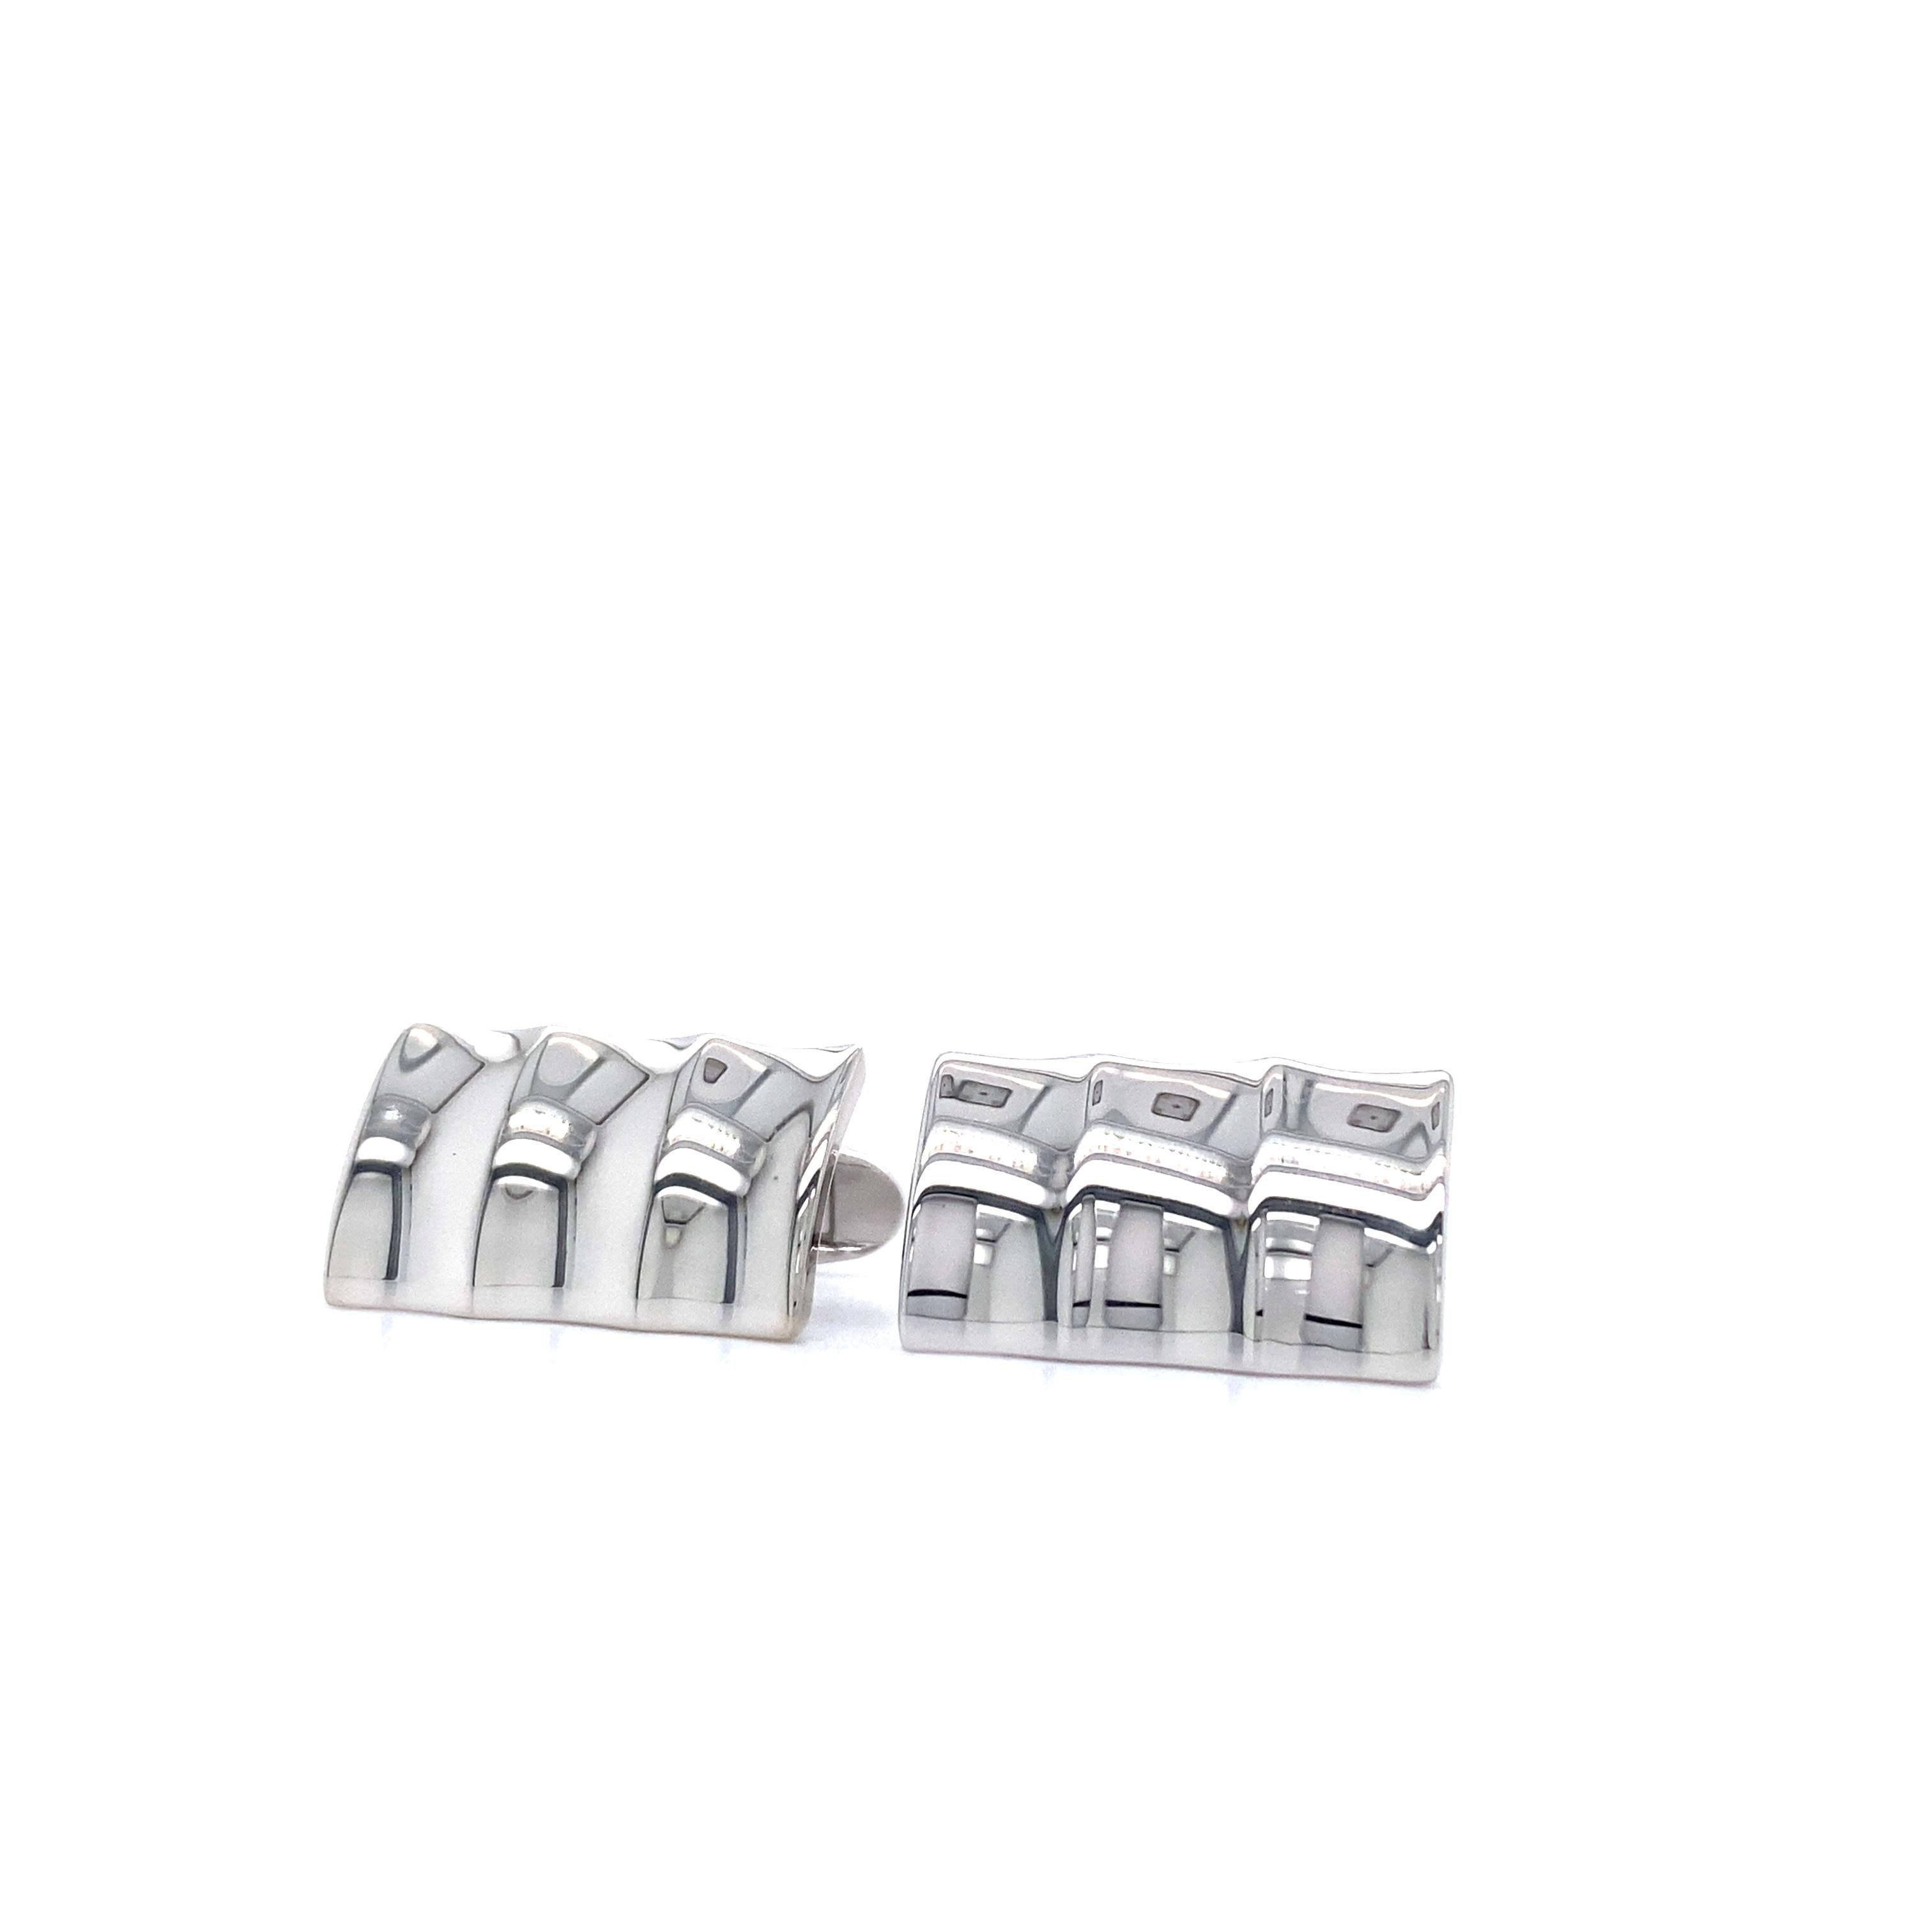 Fluted Rectangular Cufflinks in Solid 925 Sterling Silver For Sale 2